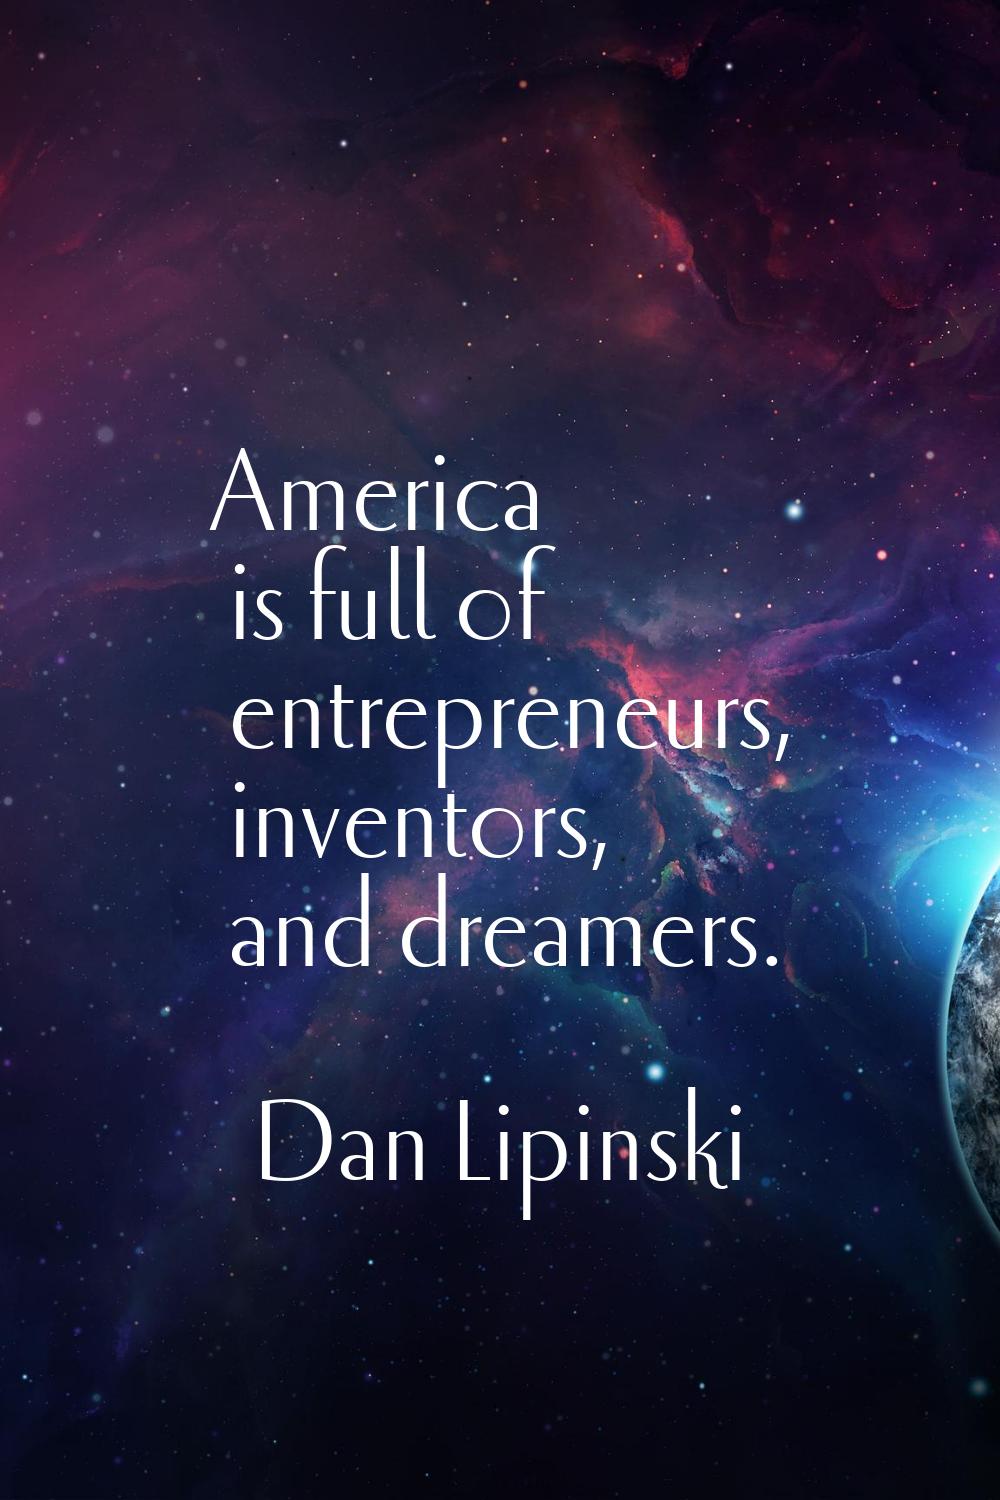 America is full of entrepreneurs, inventors, and dreamers.